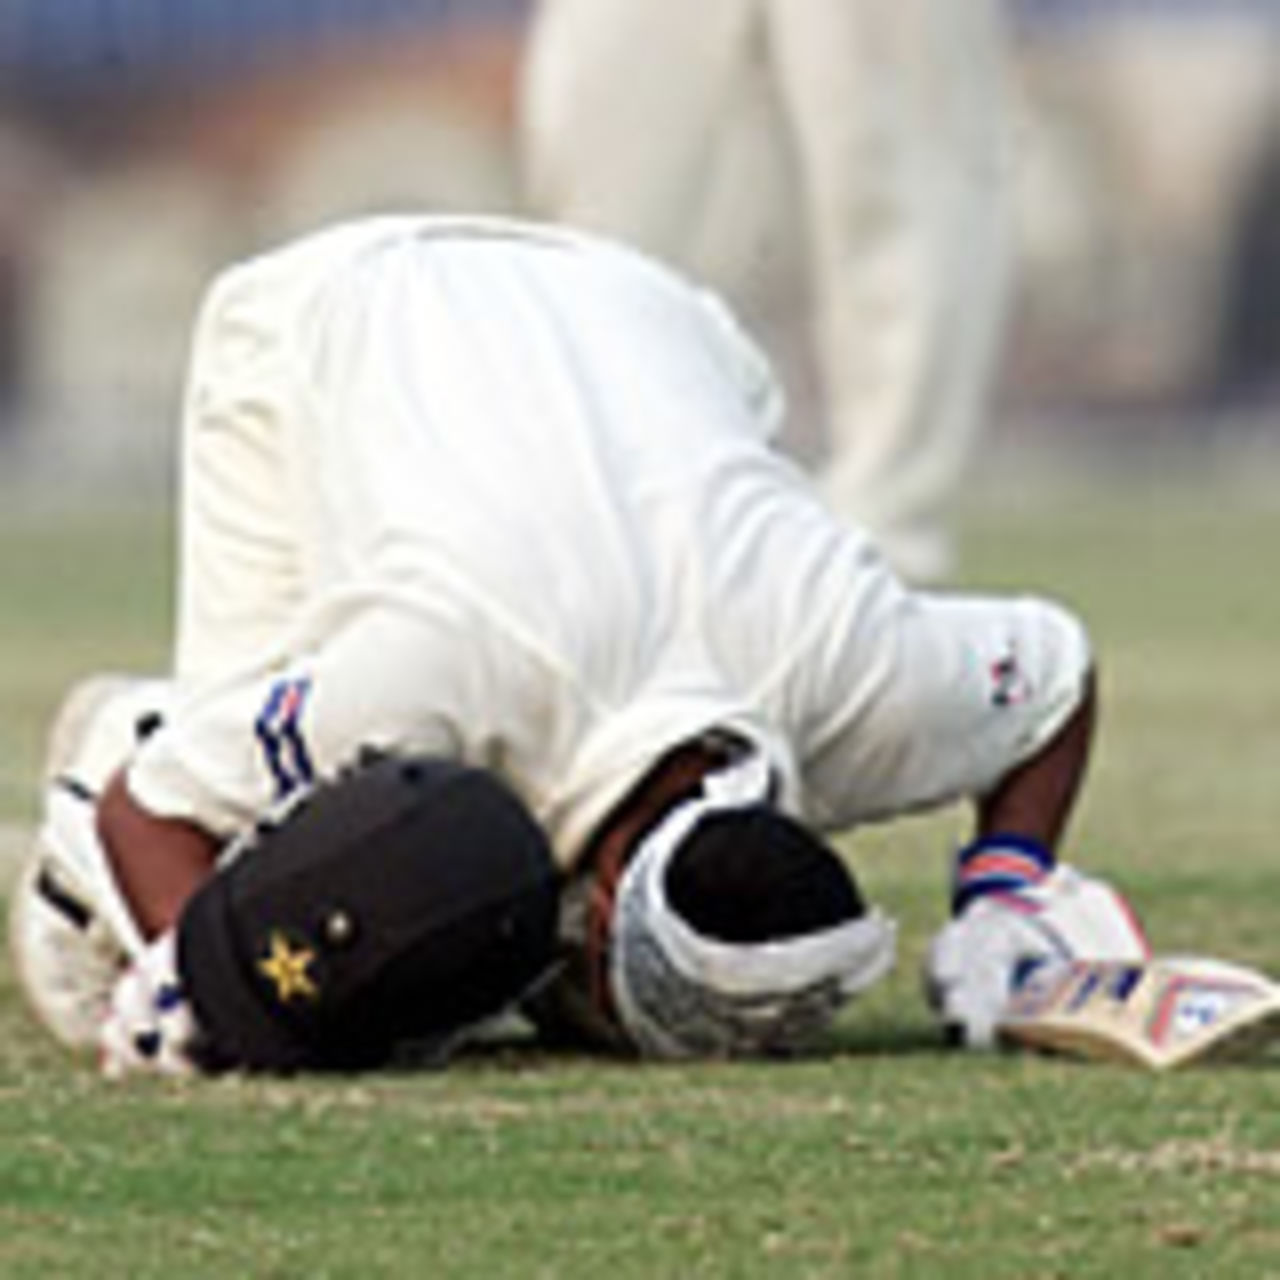 Imran Farhat thanks God for his century, Pakistan v South Africa, Day 2, 2nd Test, Faisalabad, October 20, 2003.